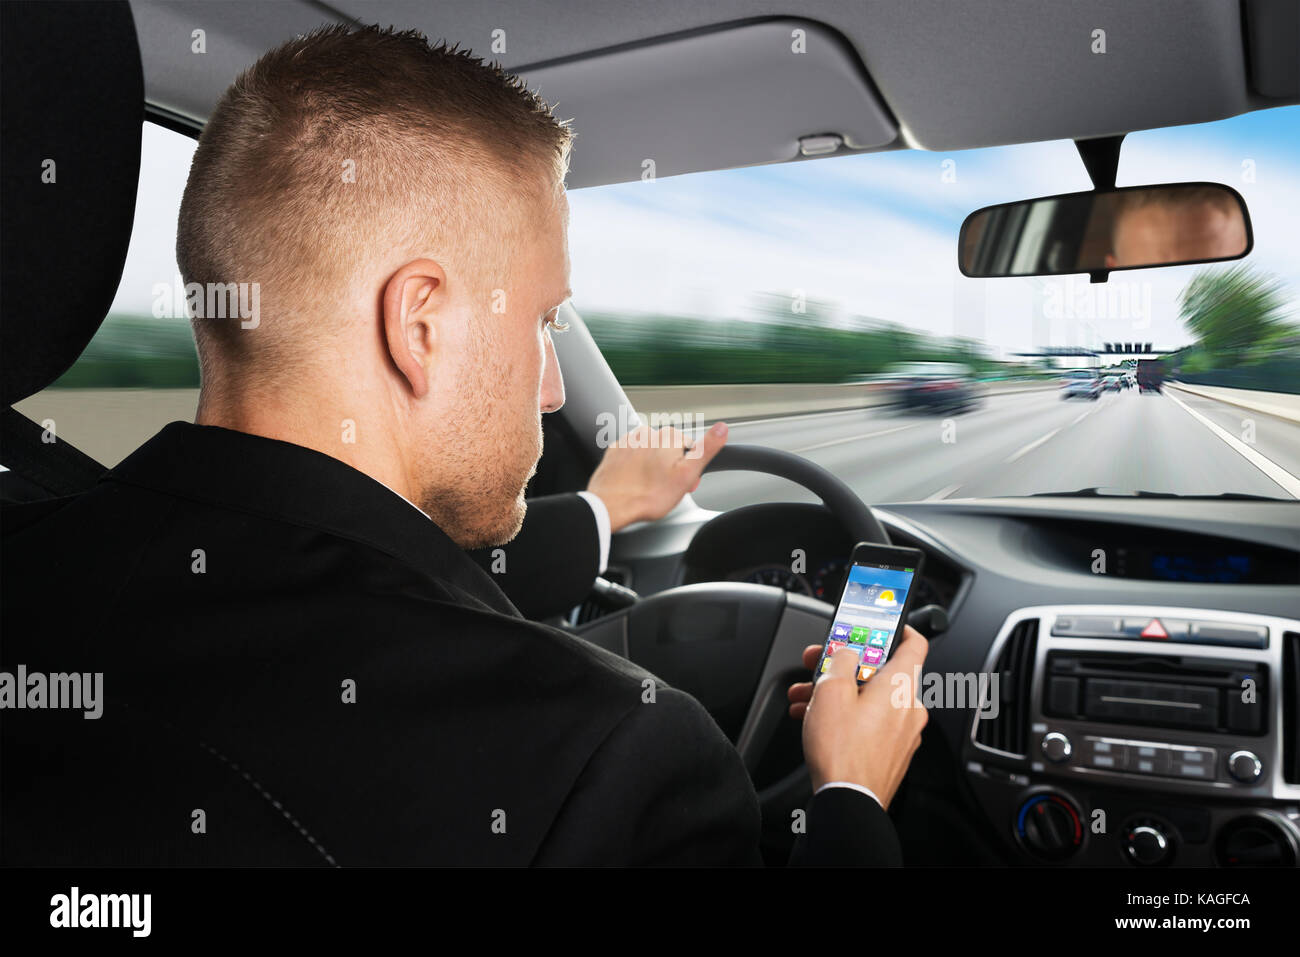 Rear View Of A Businessman Using Cellphone While Driving Car Stock Photo